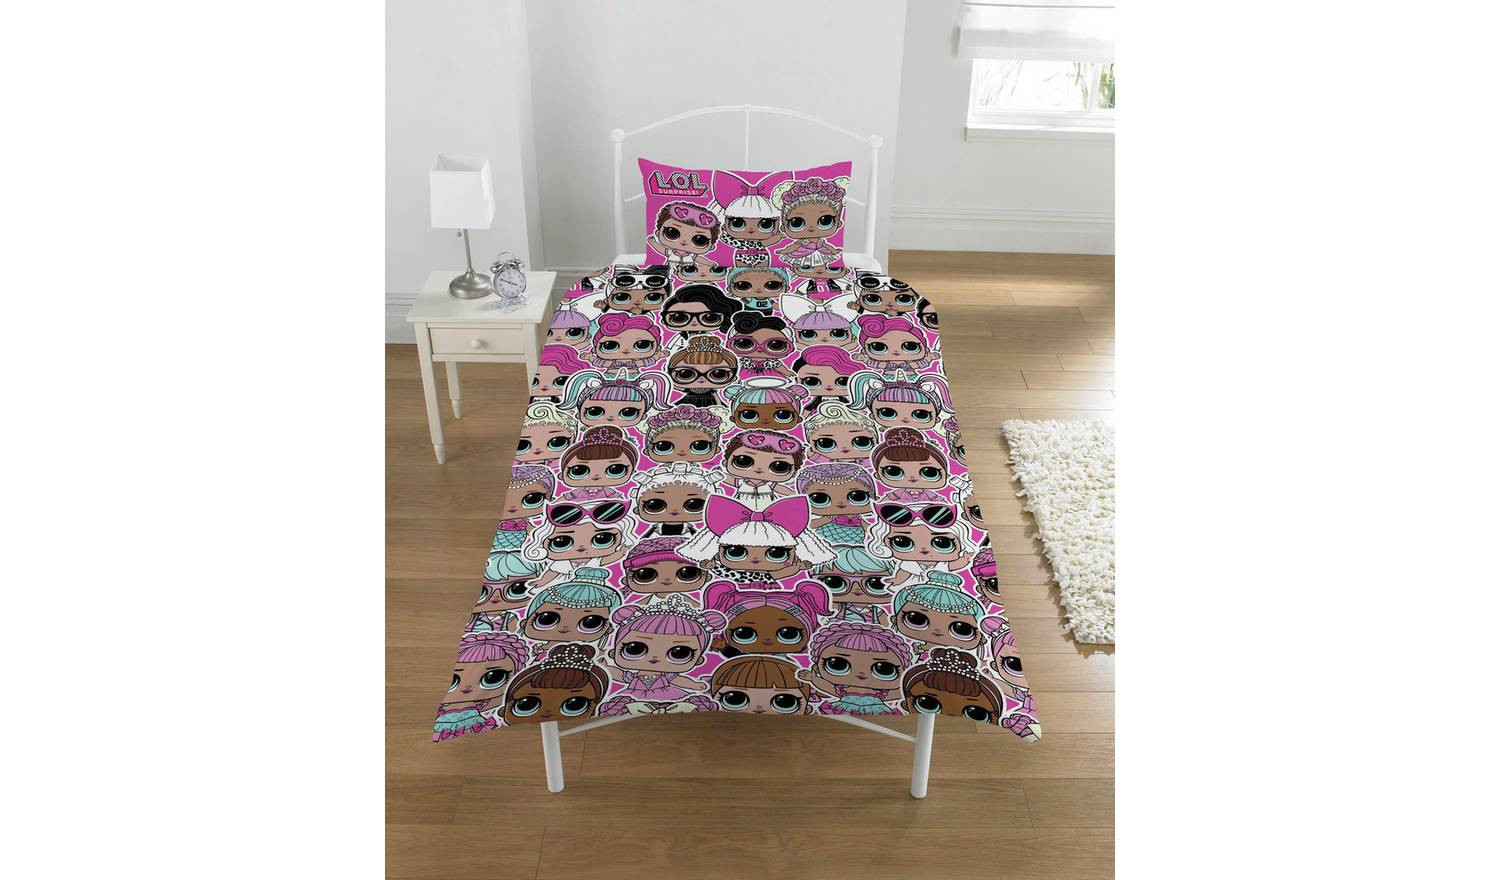 Save 25 On This Lol Surprise Bedding Set Single 11 25 With